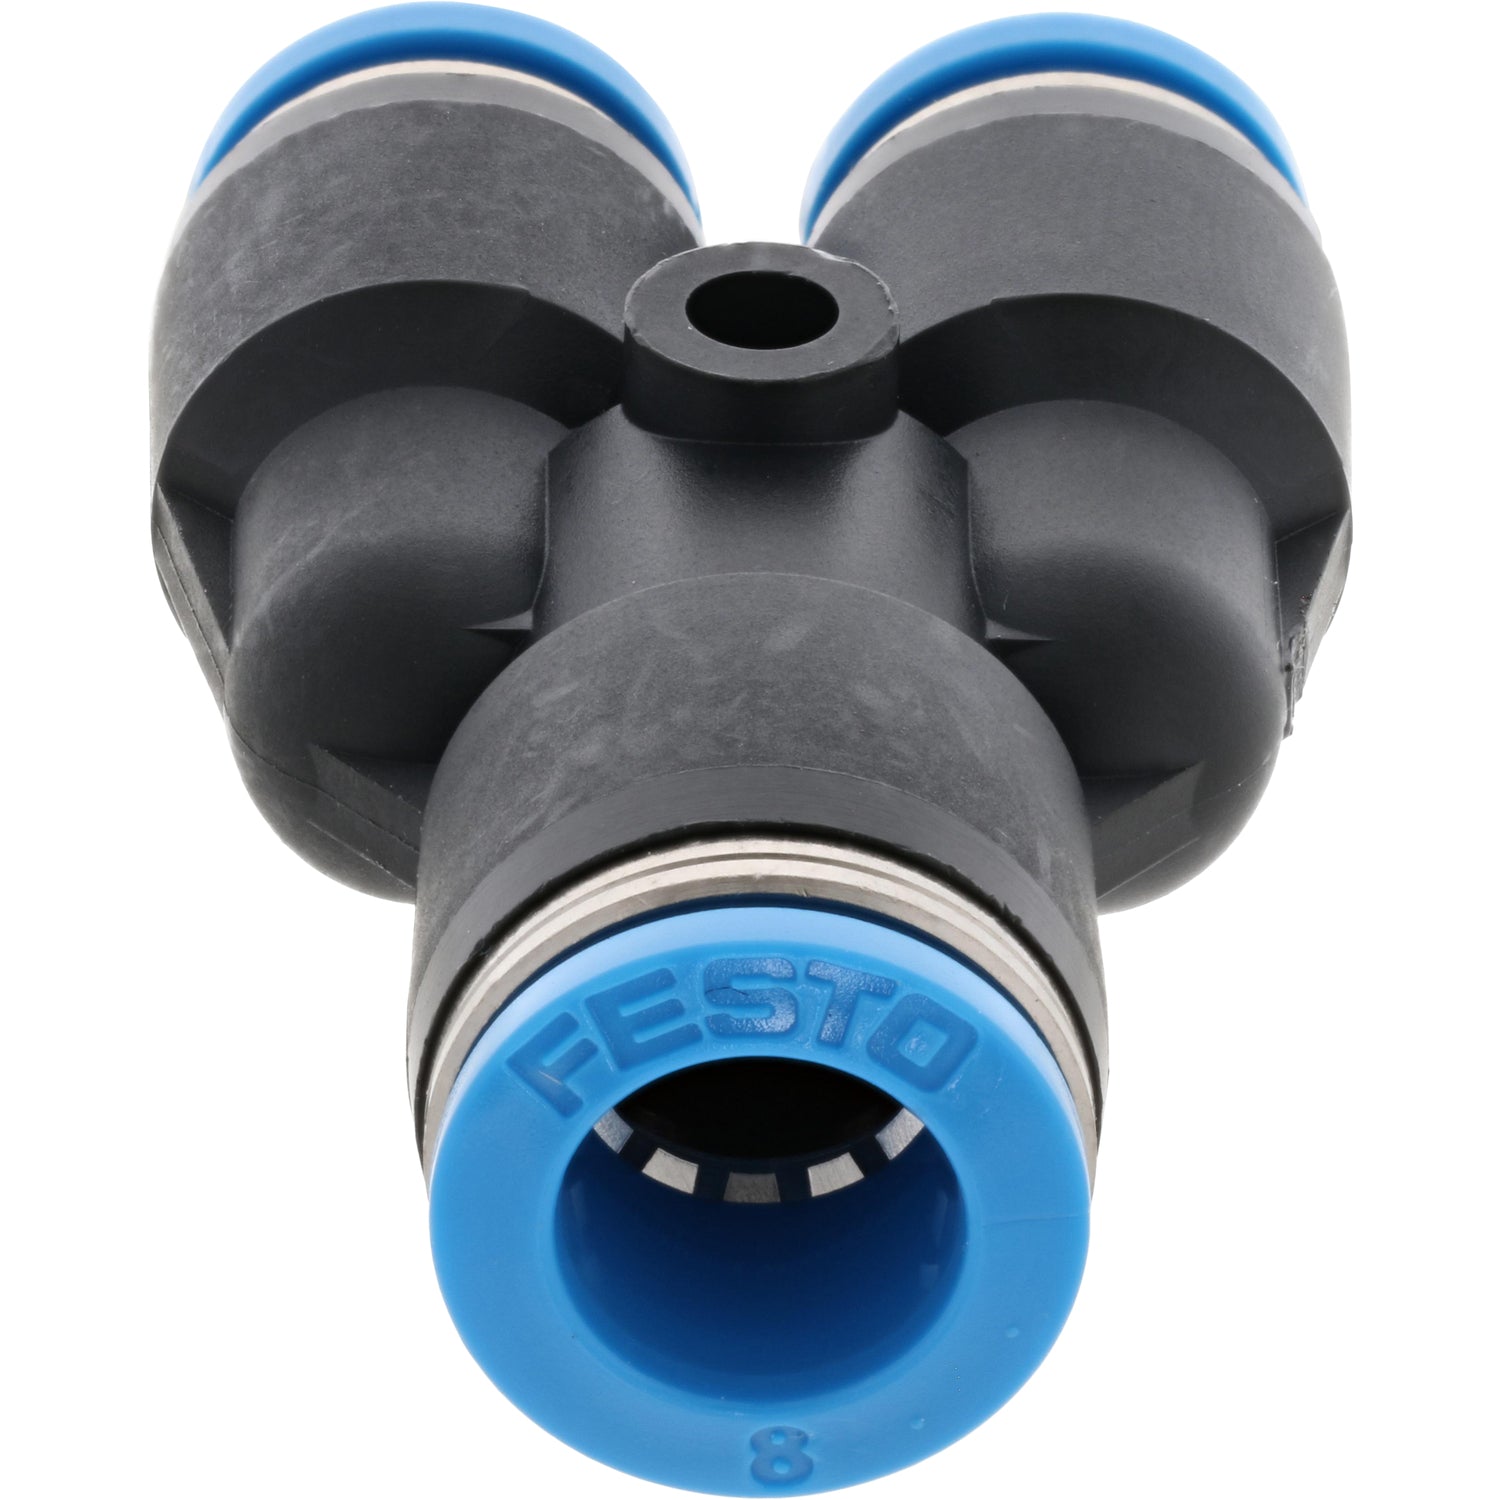 Black and blue plastic push connect Y-fitting. The part is showing one open blue port with "Festo" and the number eight stamped into the plastic. Part is shown on white background. 